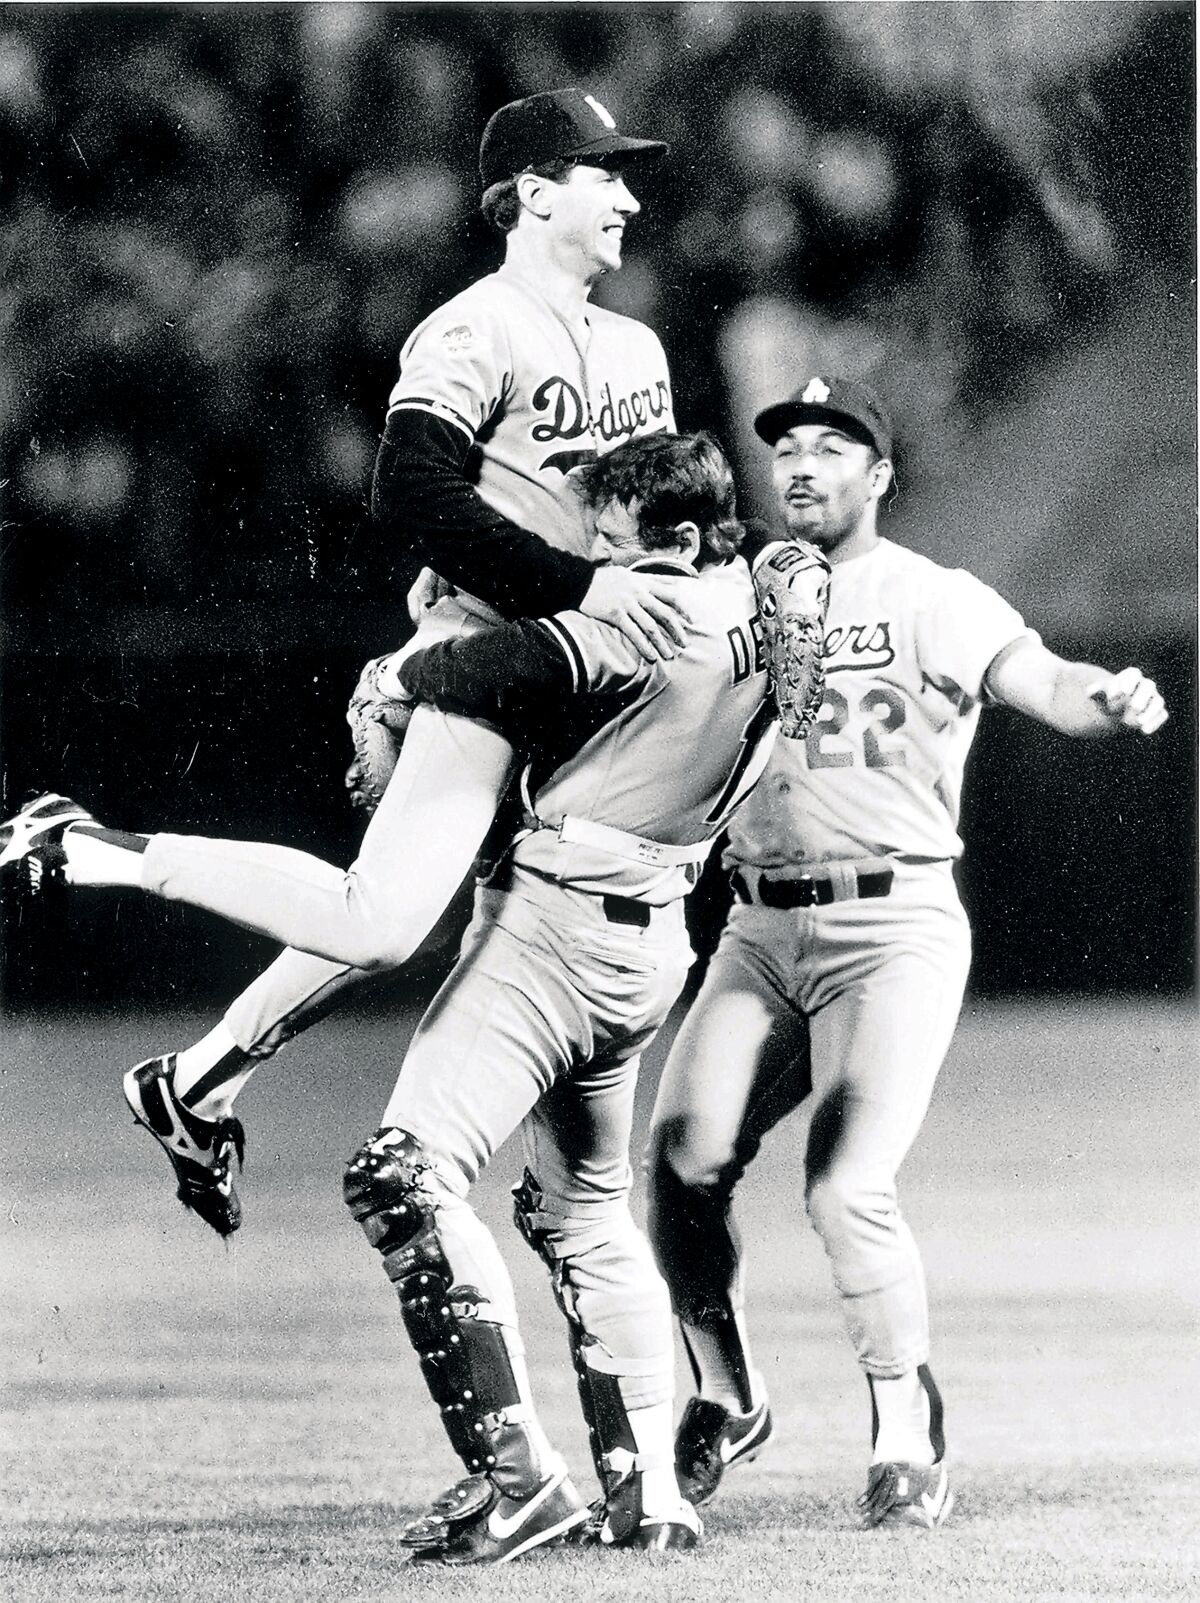 Rick Dempsey lifts Orel Hershiser after winning the 1988 World Series. Franklin Stubbs is ready to join.